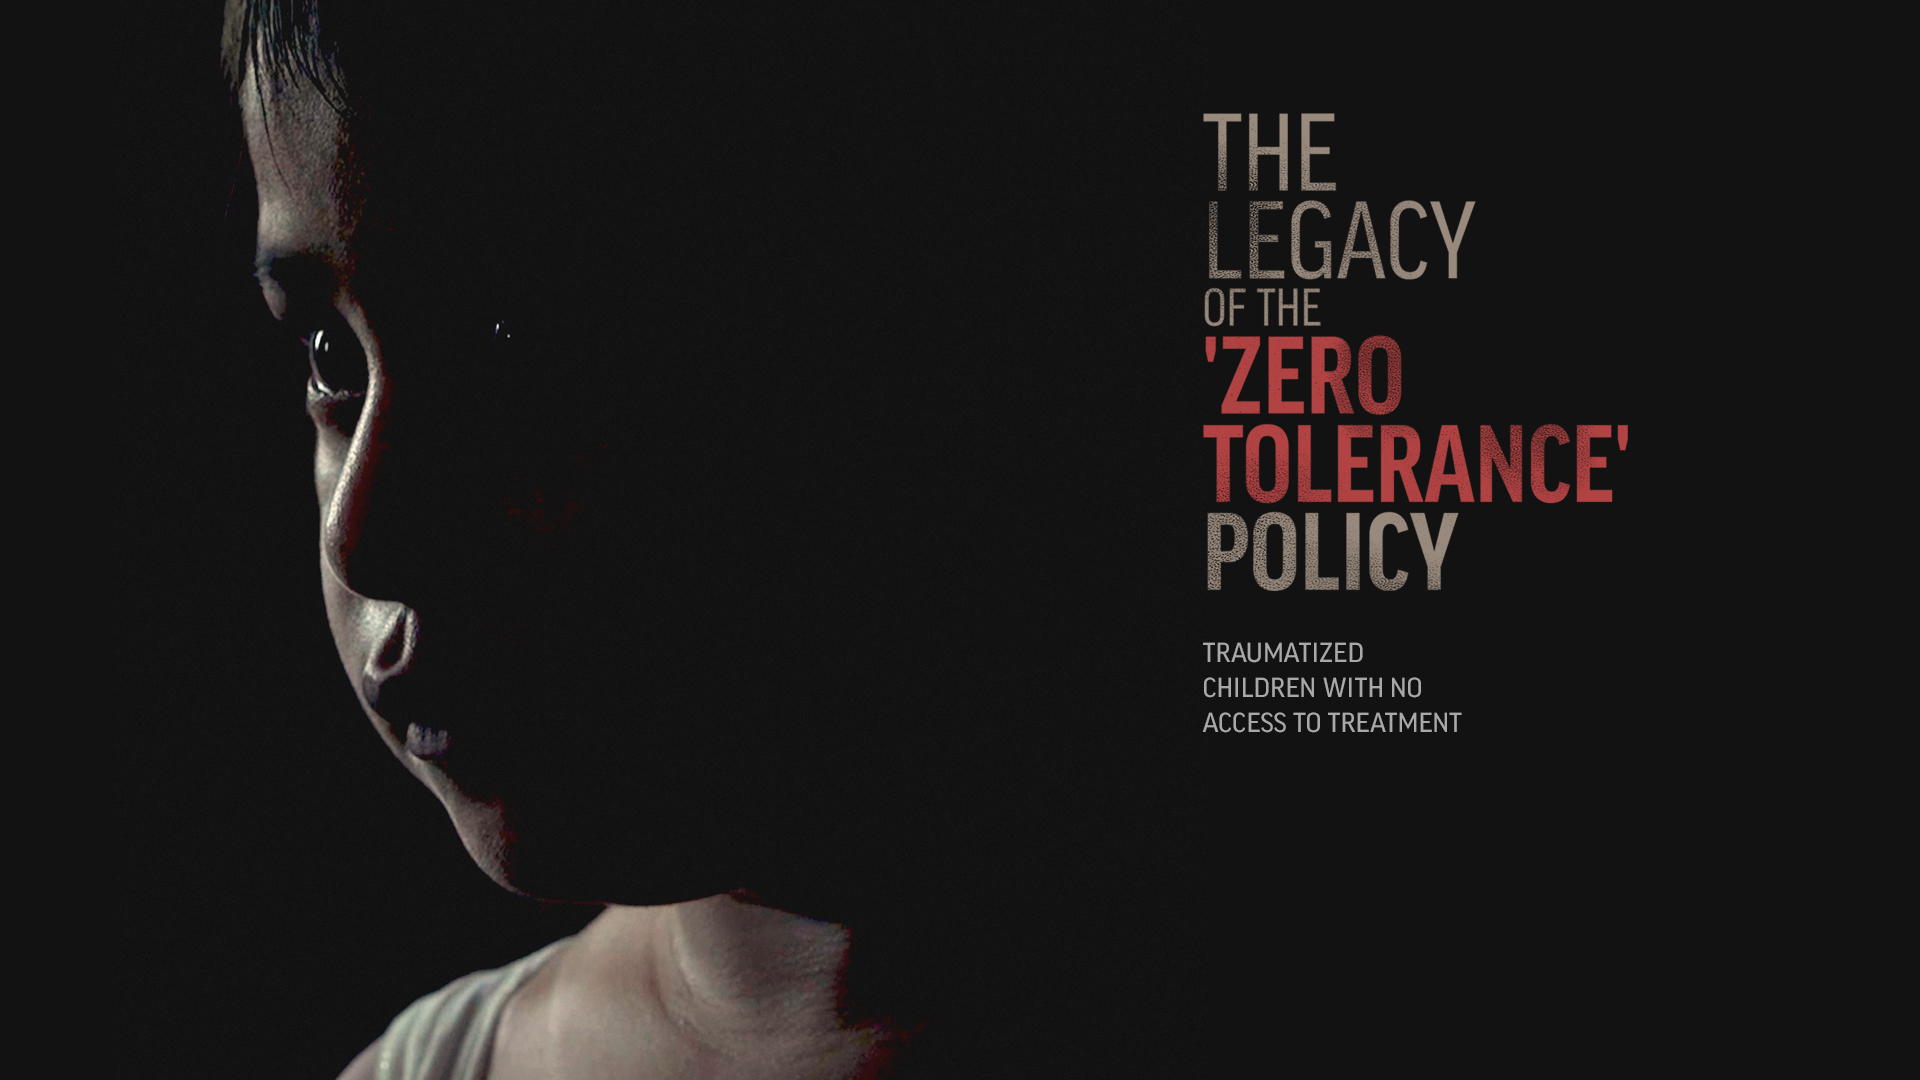 21_Wallpaper_The Legacy of the ÔÇÿZero ToleranceÔÇÖ Policy_ Traumatized Children With No Access to Treatment_Univision News Digital.jpg